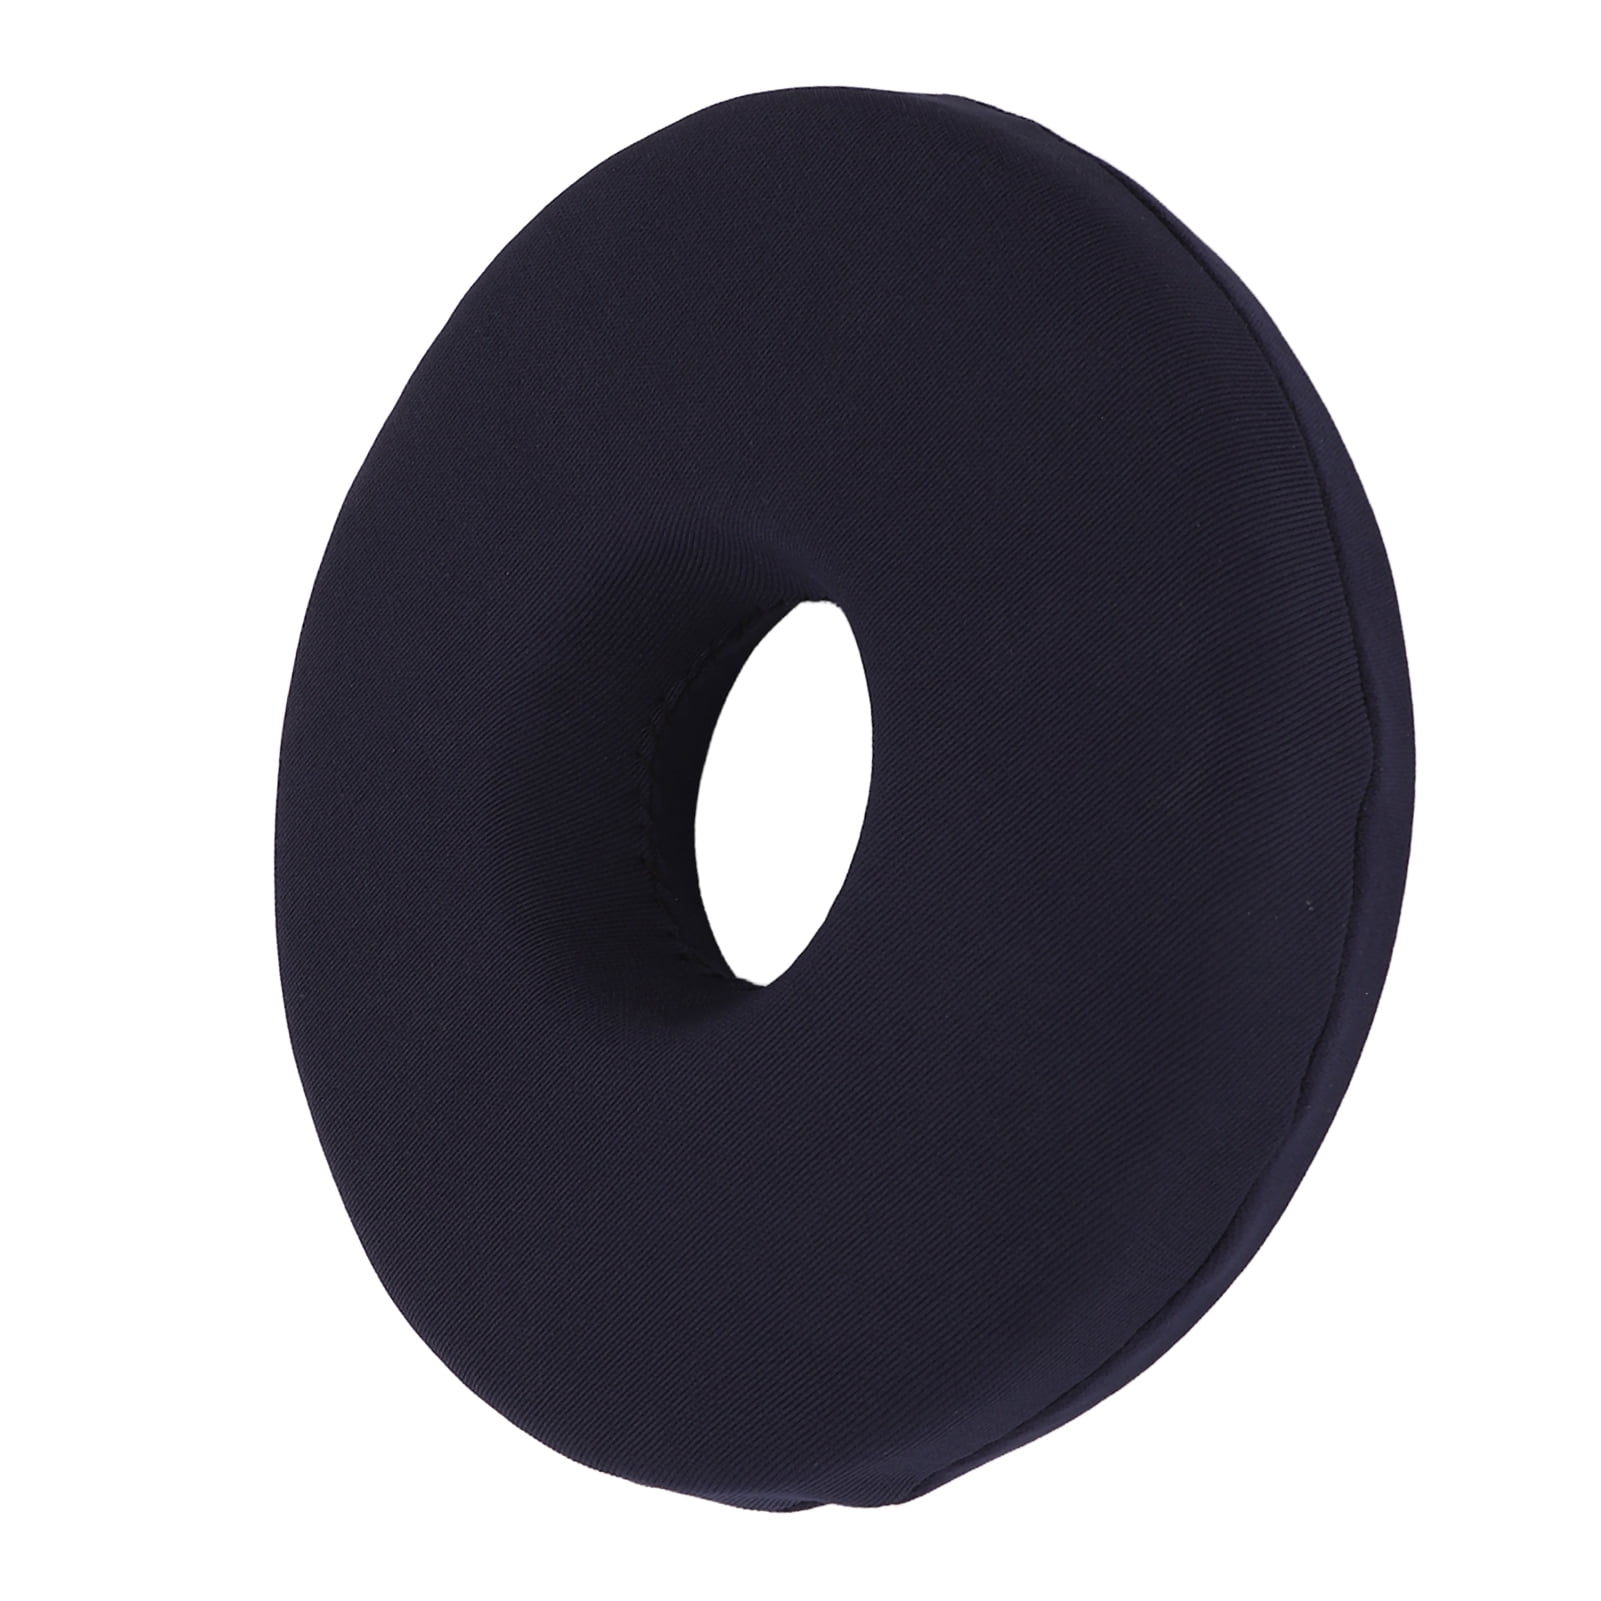 Bed Sore Donut Pillow Bed Sore Donut Cushion Pressure Ulcer Donut Cushion  HOT 